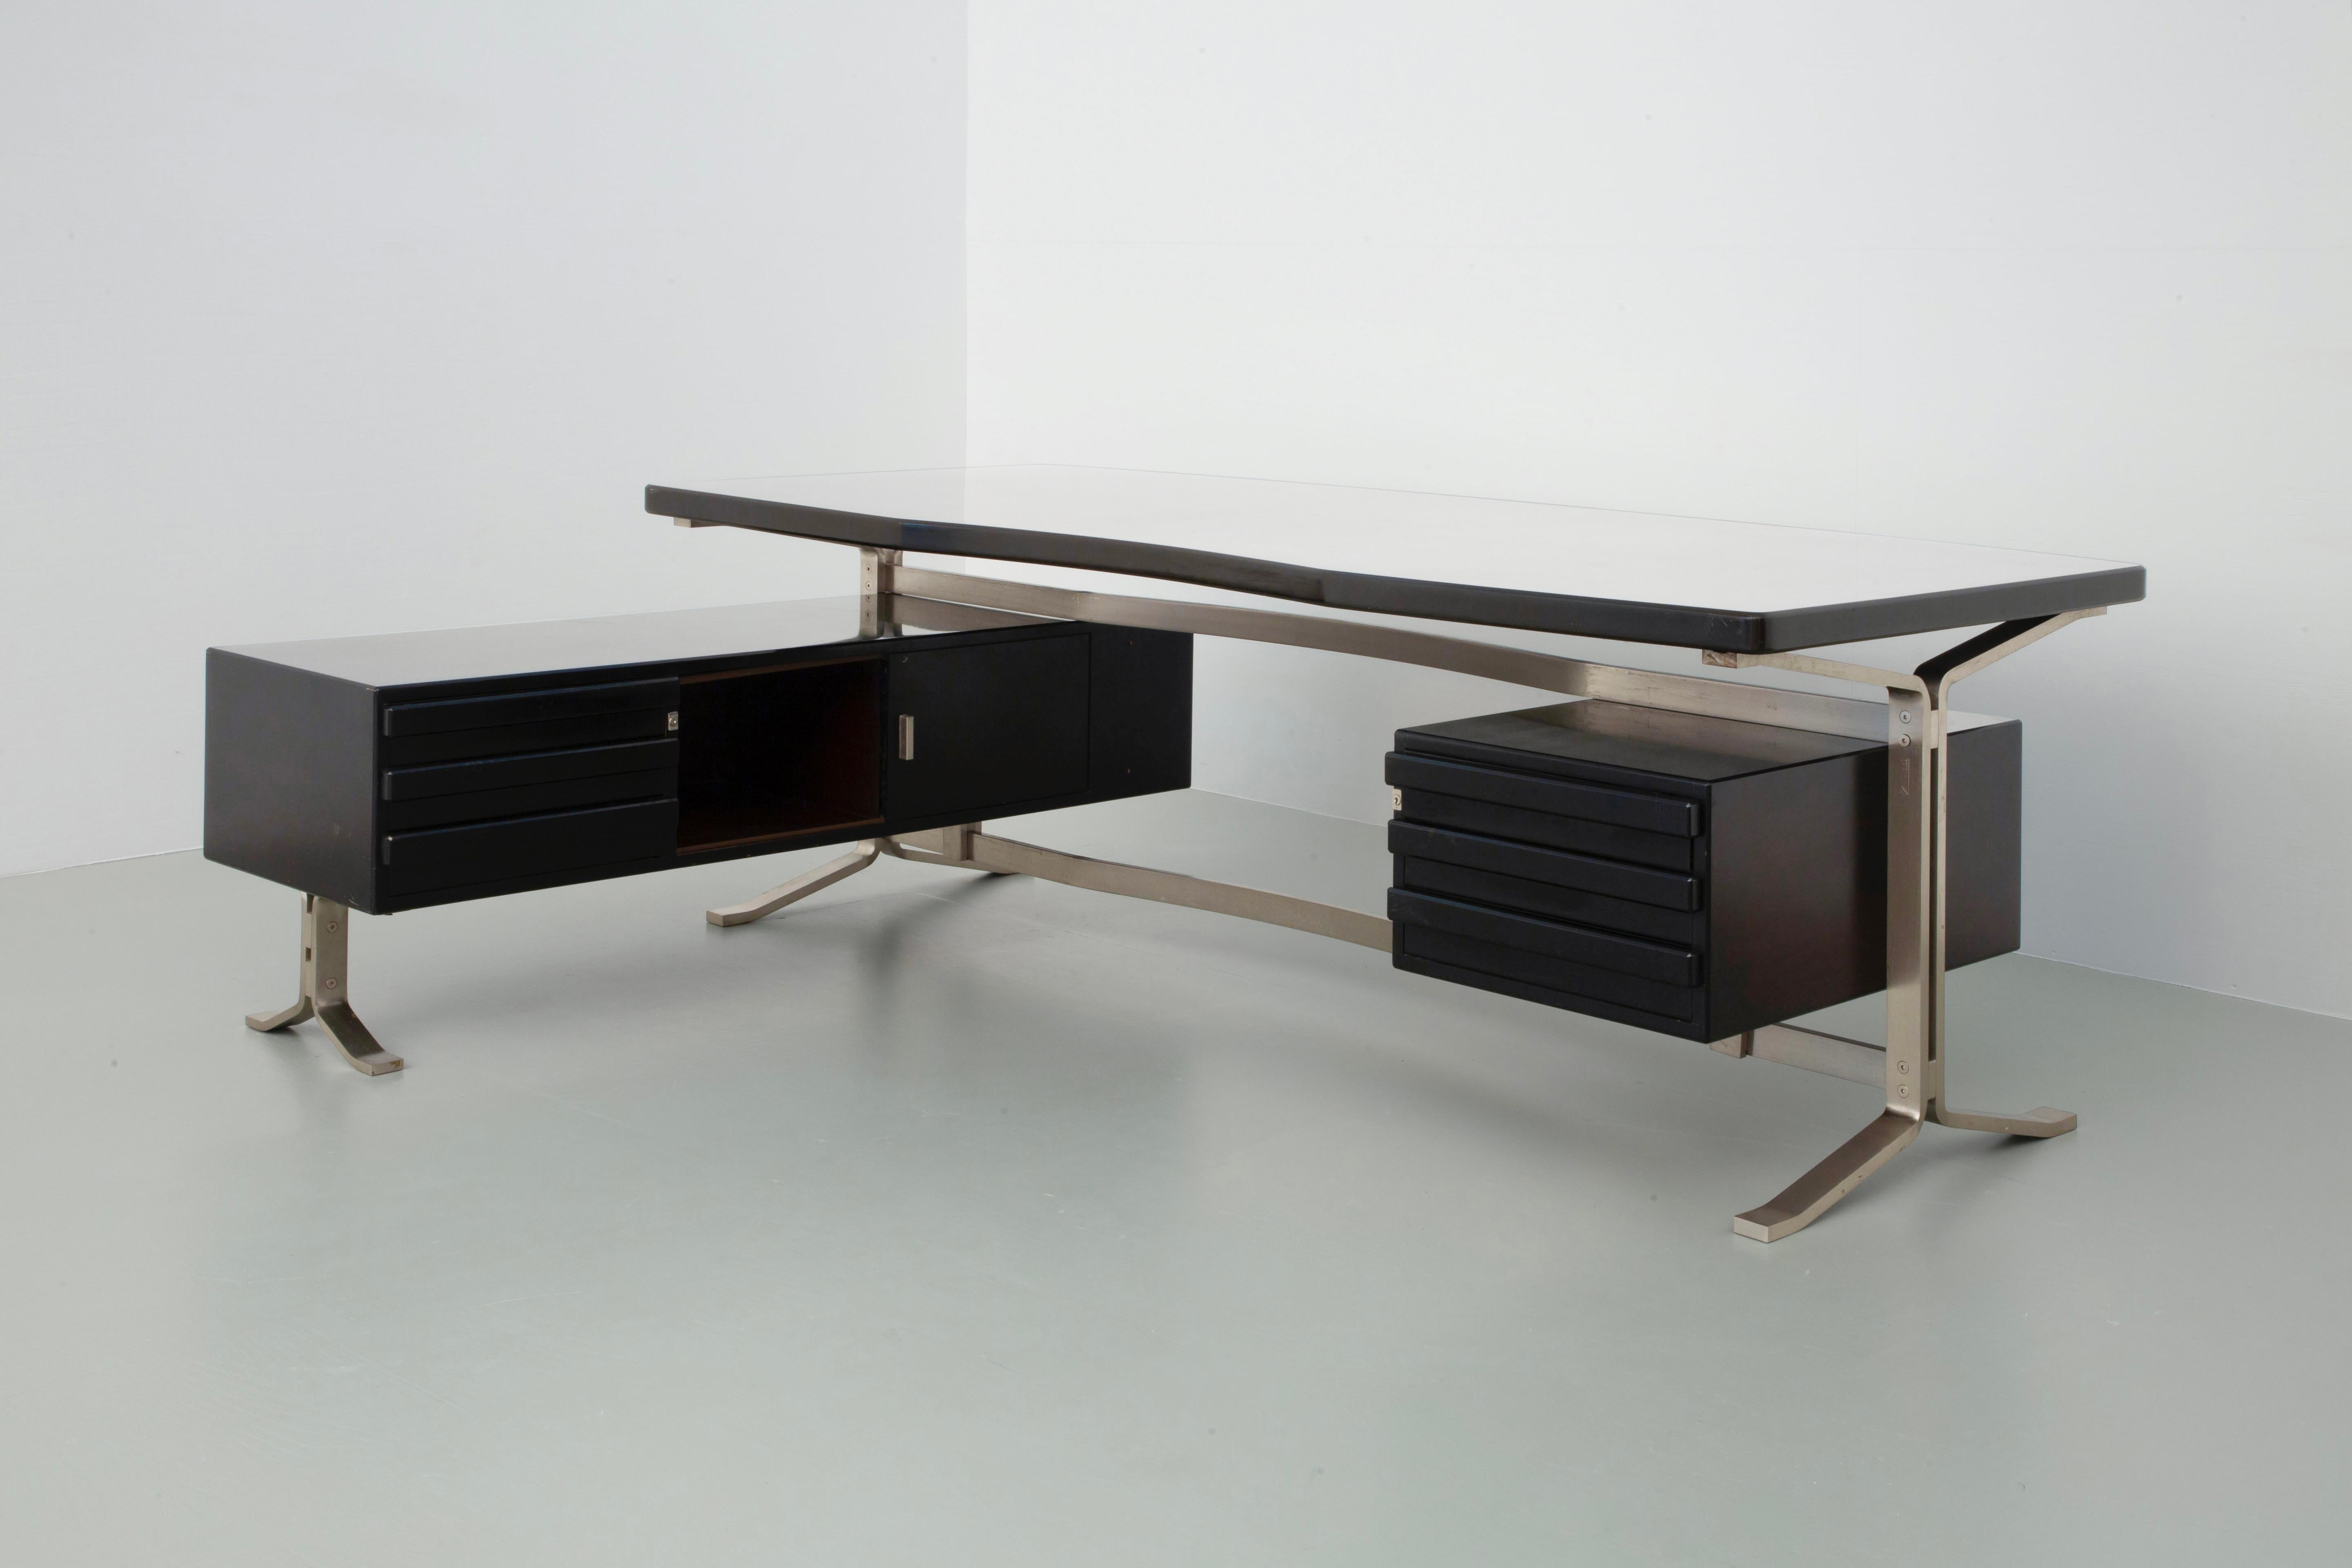 A rare executive desk by Giovanni Moscatelli for Formanova. Great combination in the materials that were used: metal and wood. The wood is very dark brown, almost black and still in an amazing condition. This model is quite rare because the top of